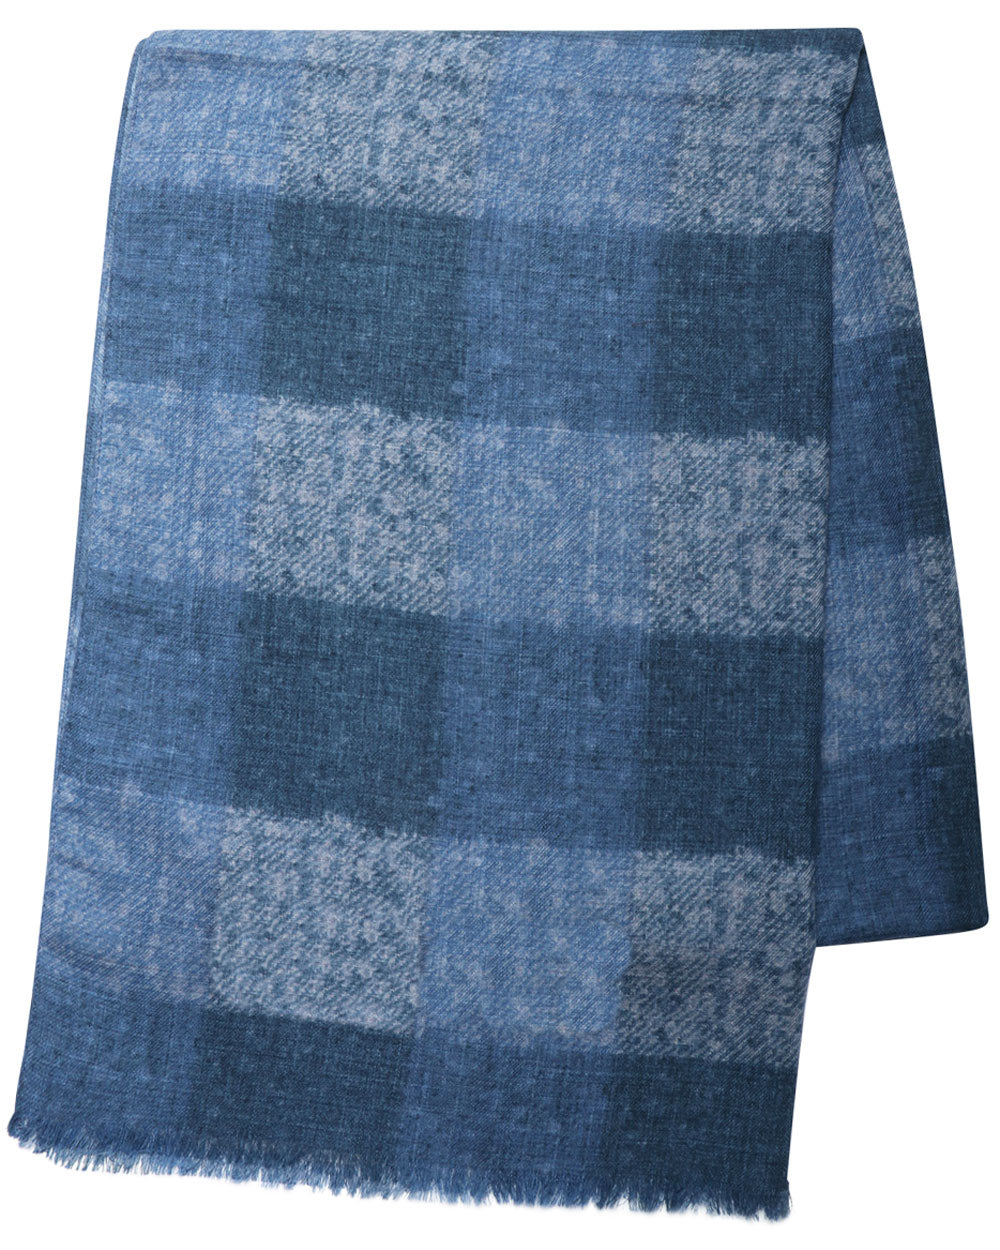 Blue and Grey Wool Scarf